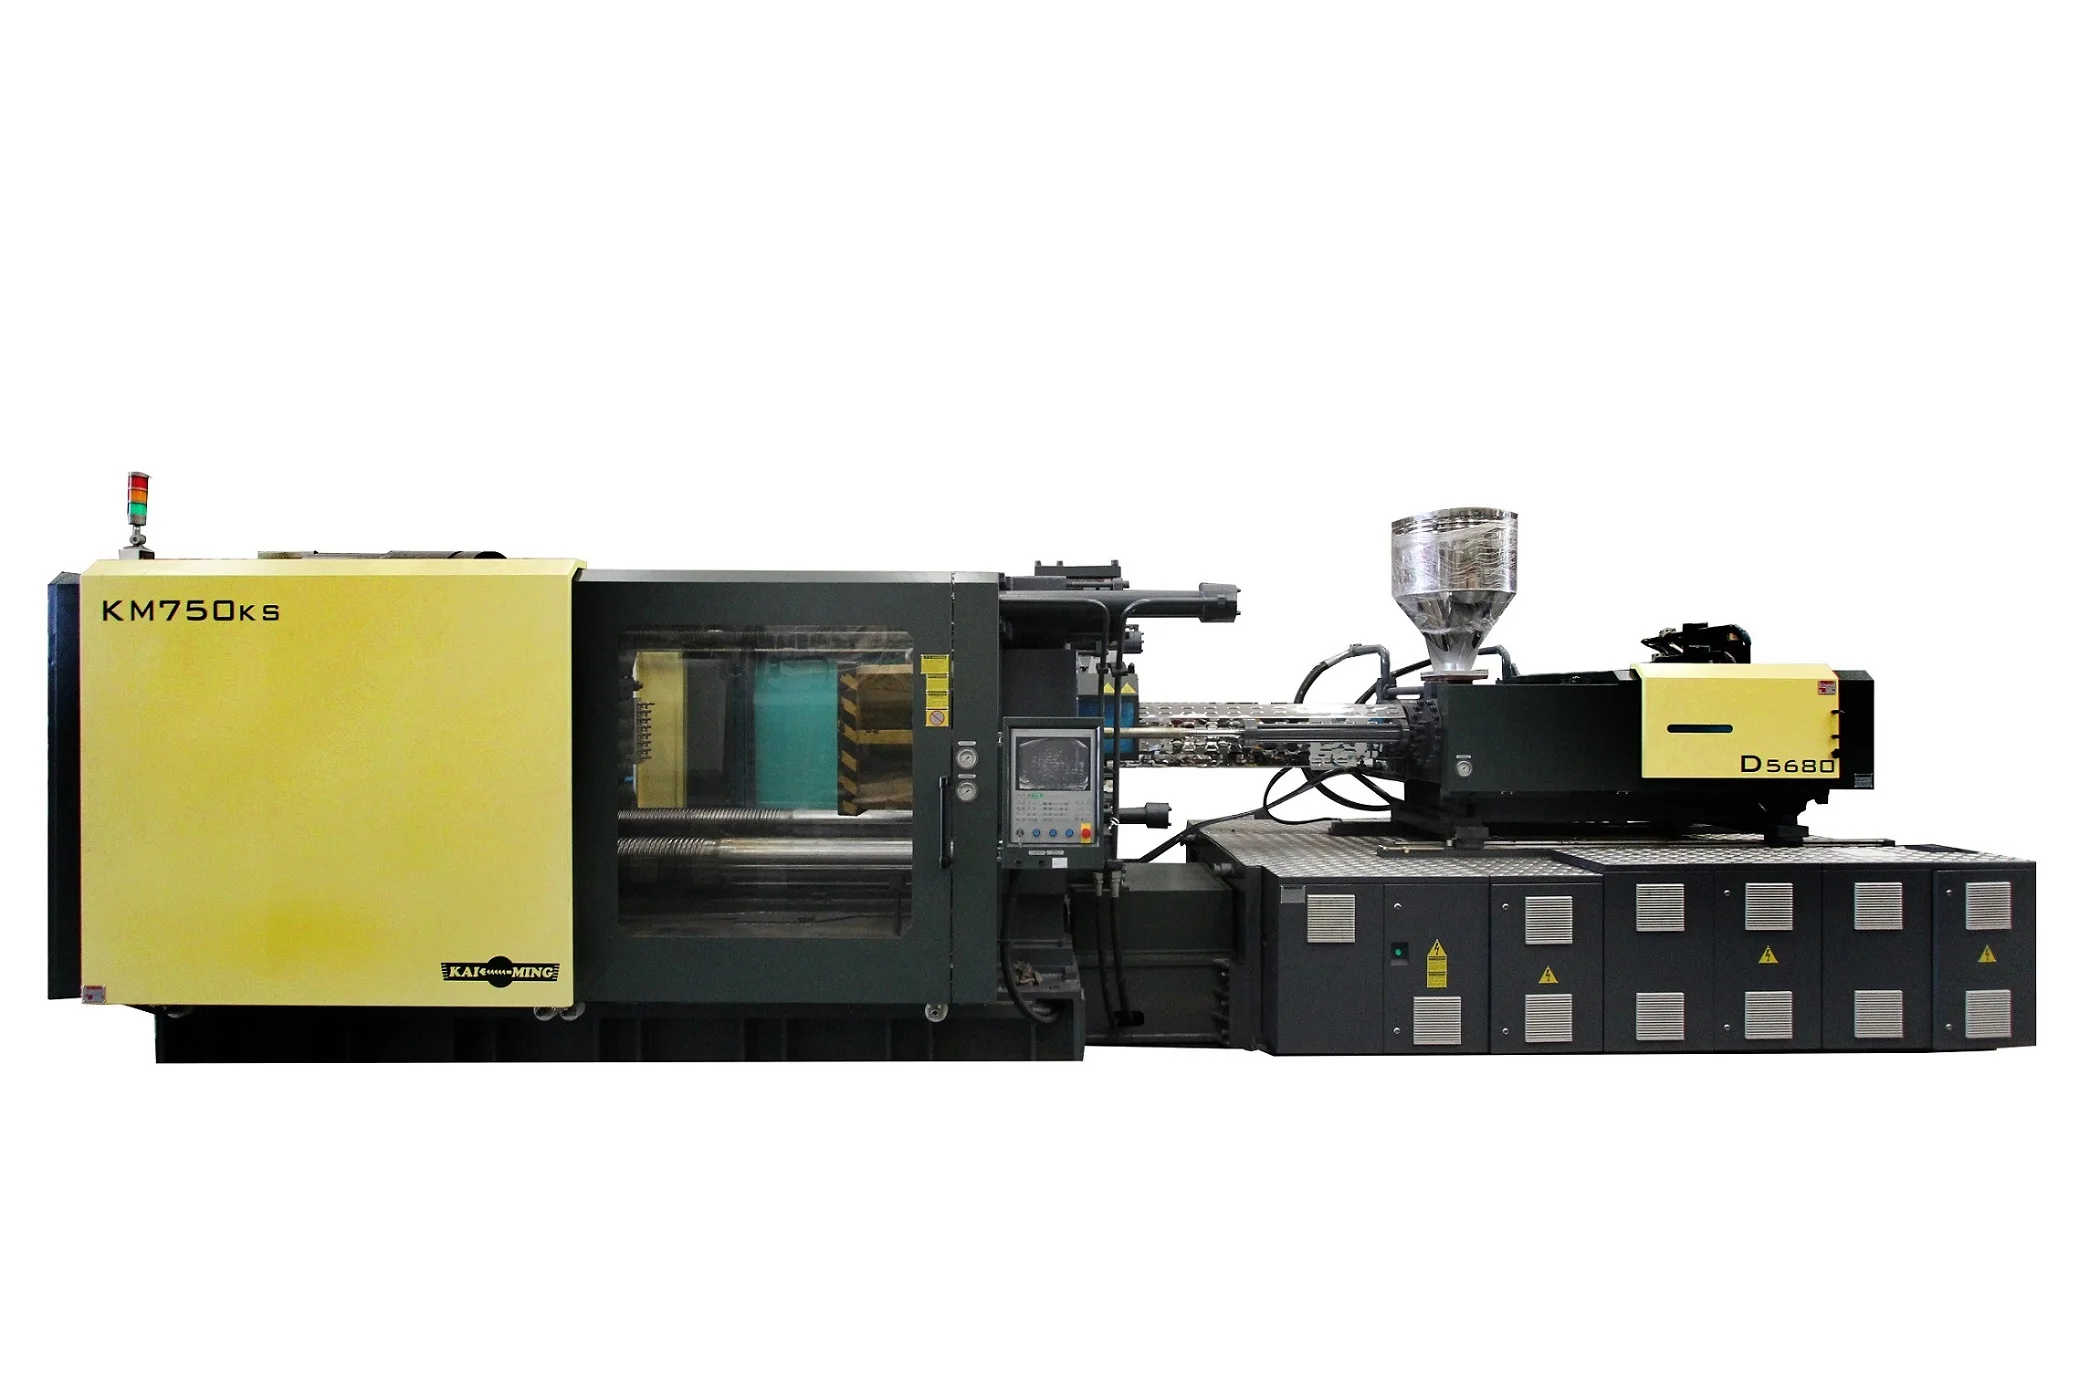 Factors to Consider When Choosing Servo-Hydraulic Injection Molding Machines